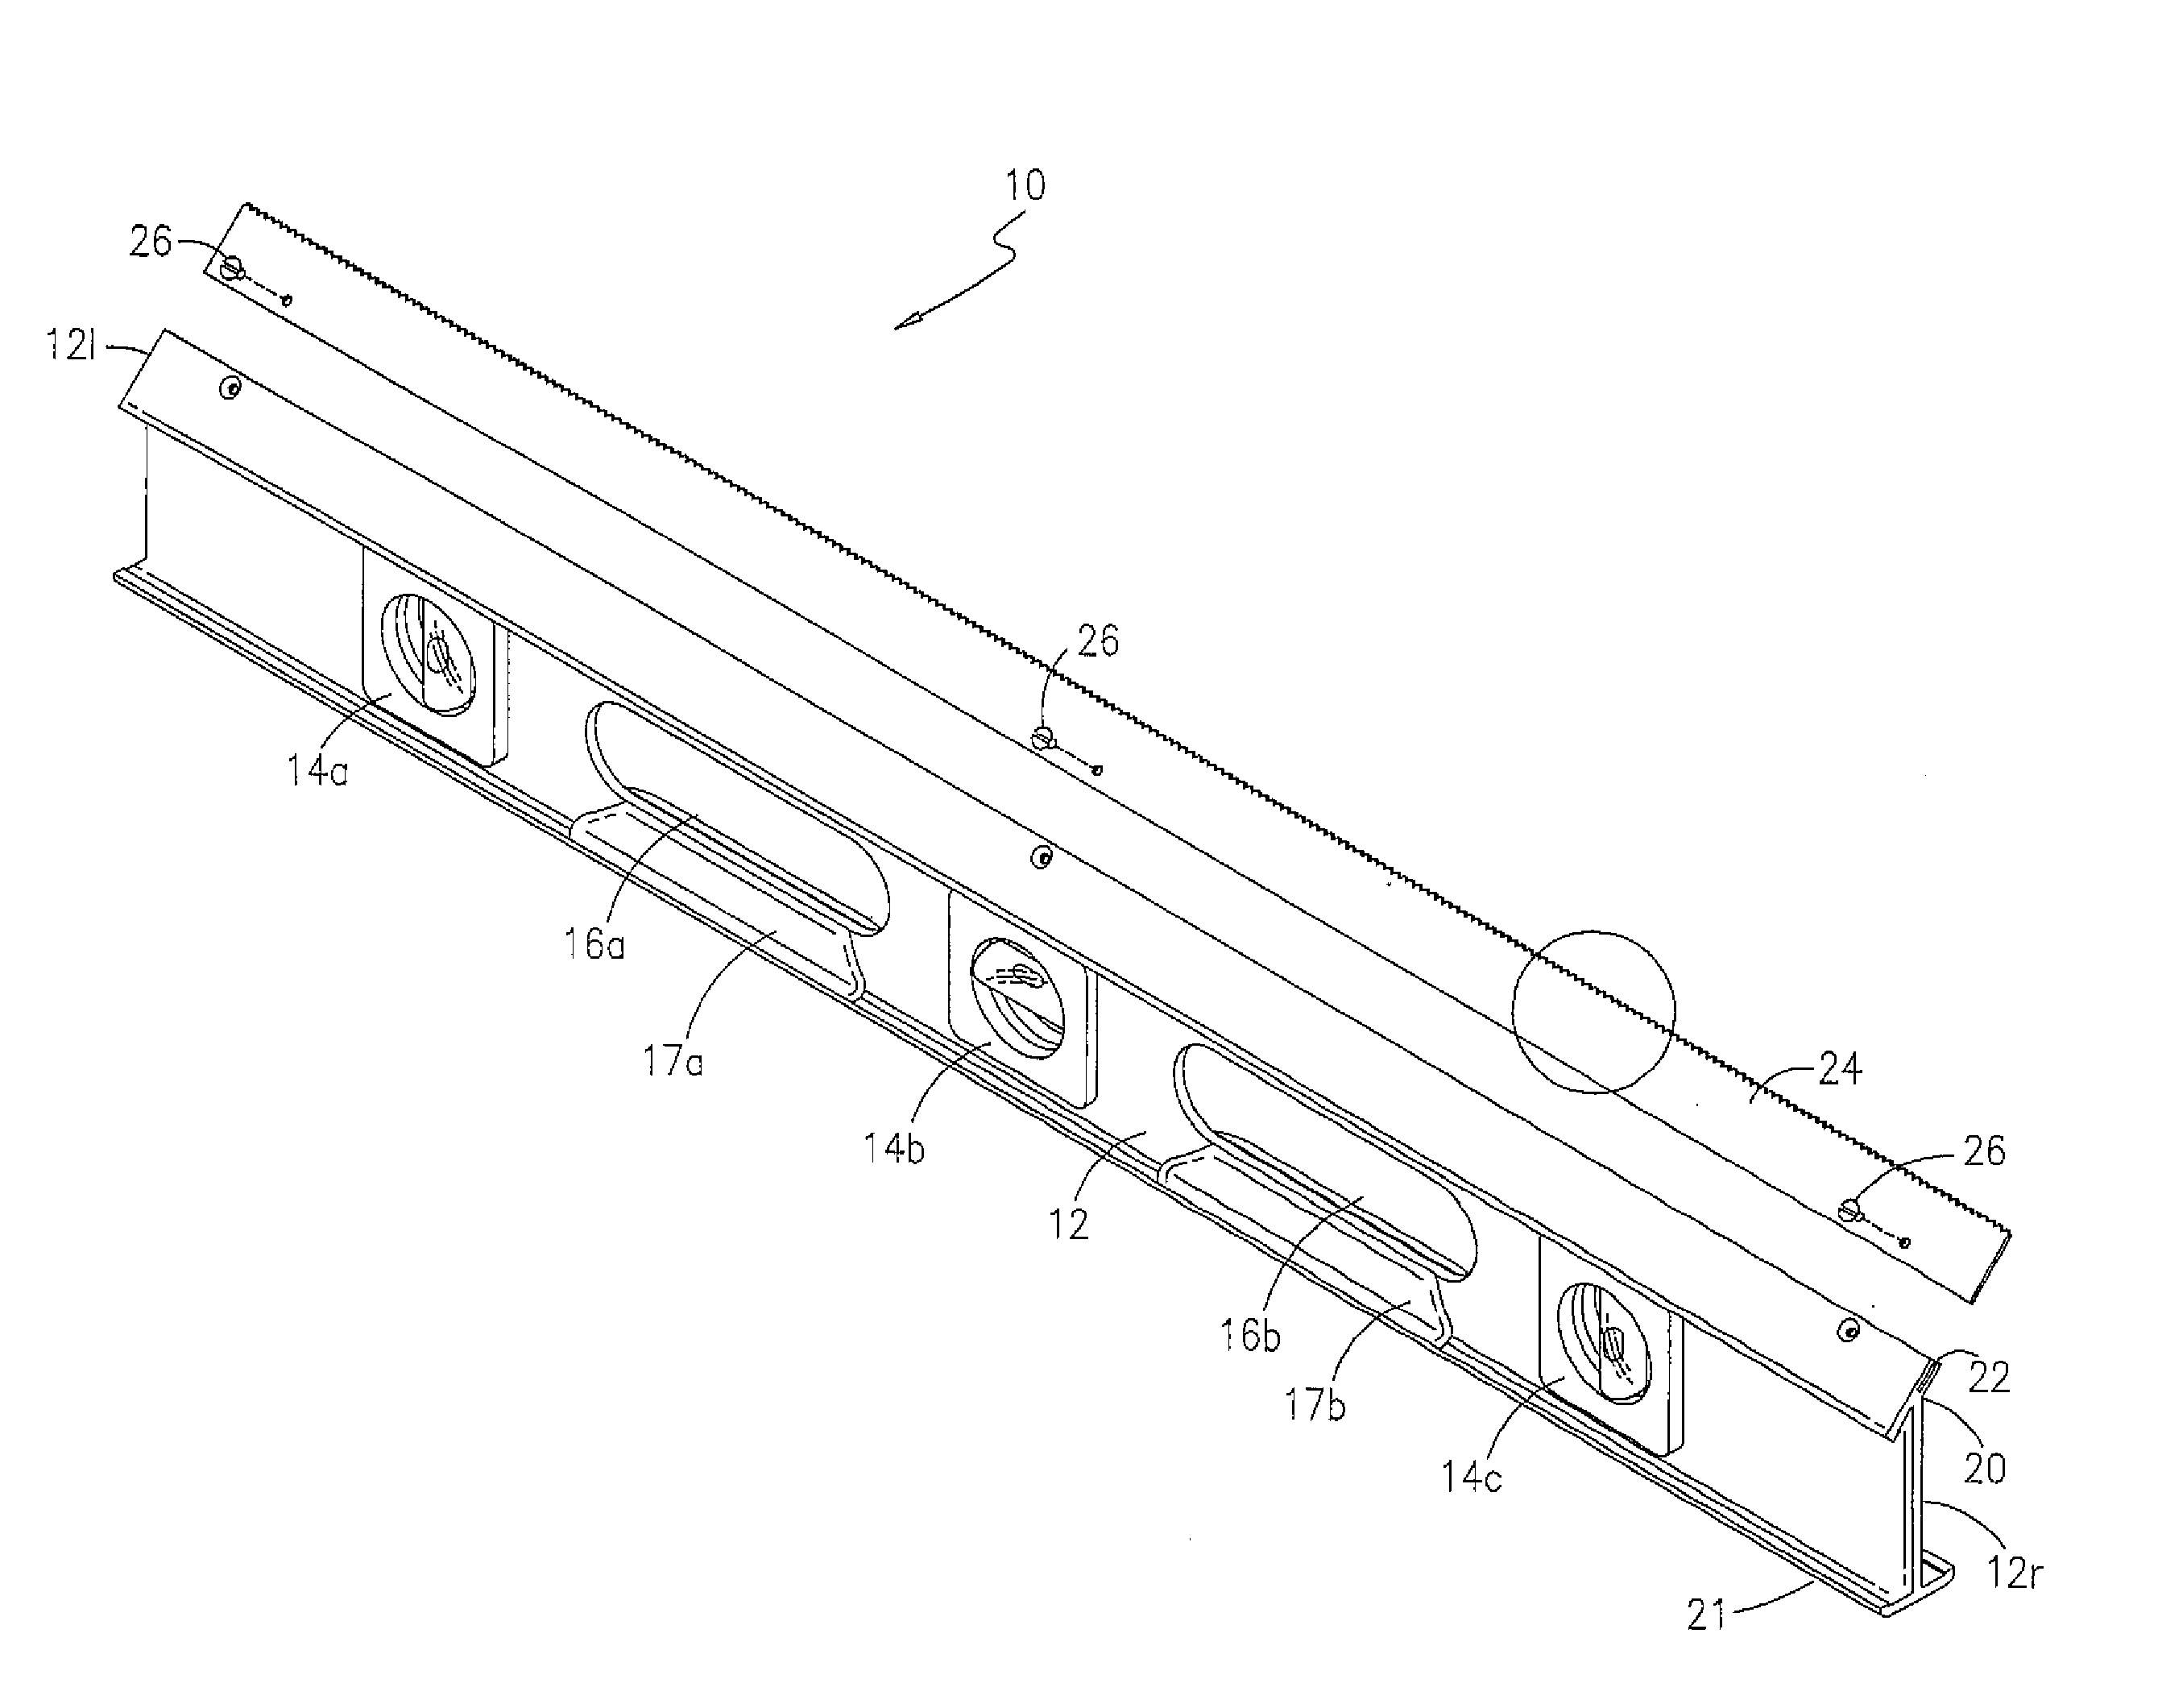 Rasp hand tool and method for using same to form and shape exterior insulation and finish system surfaces